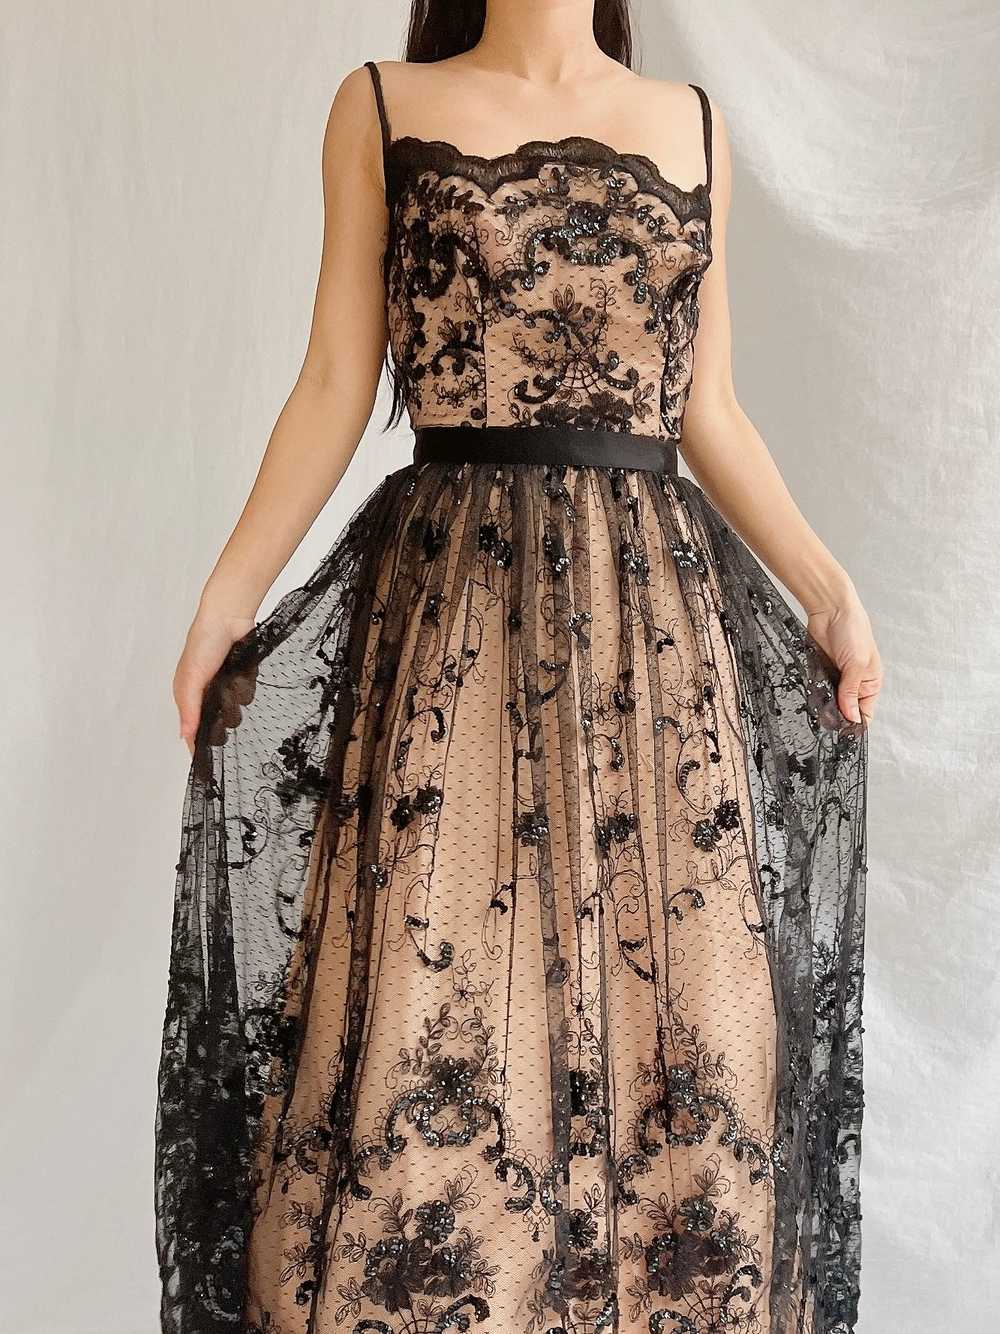 Vintage Nude and Black Lace Dress - S - image 10